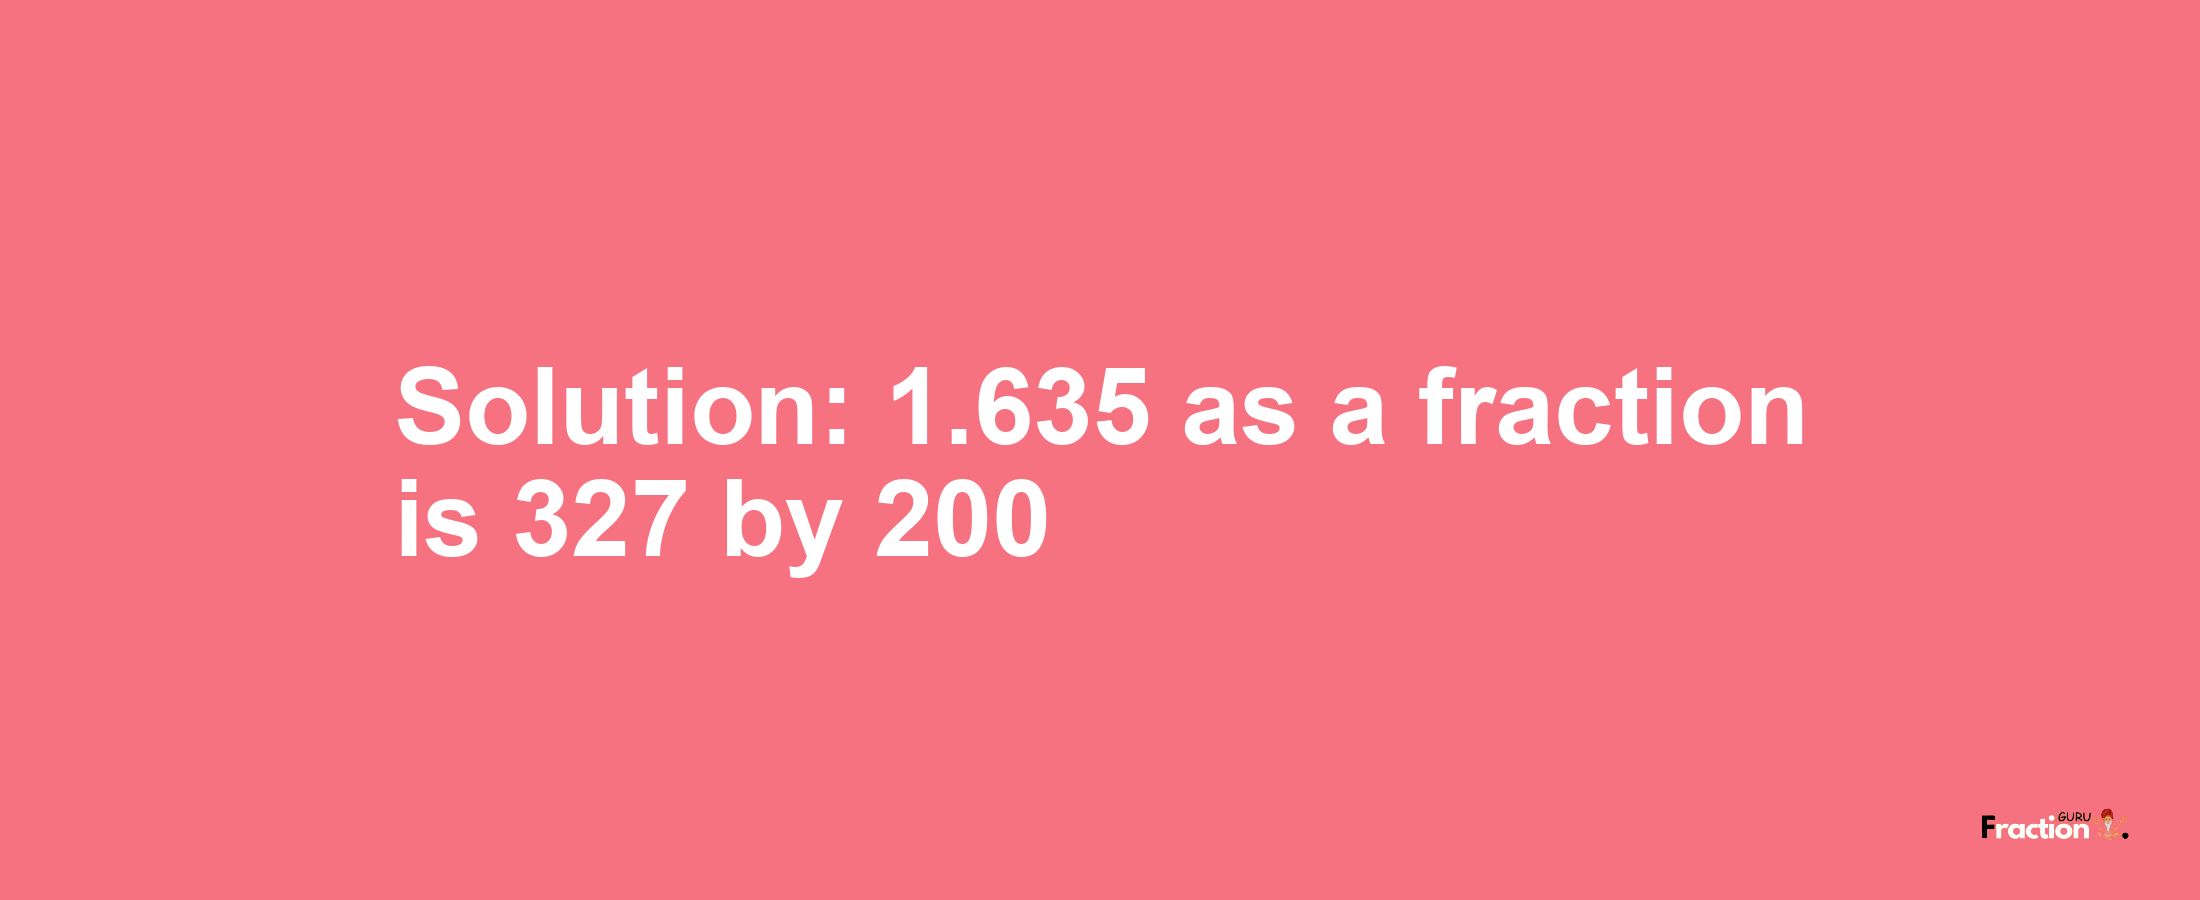 Solution:1.635 as a fraction is 327/200